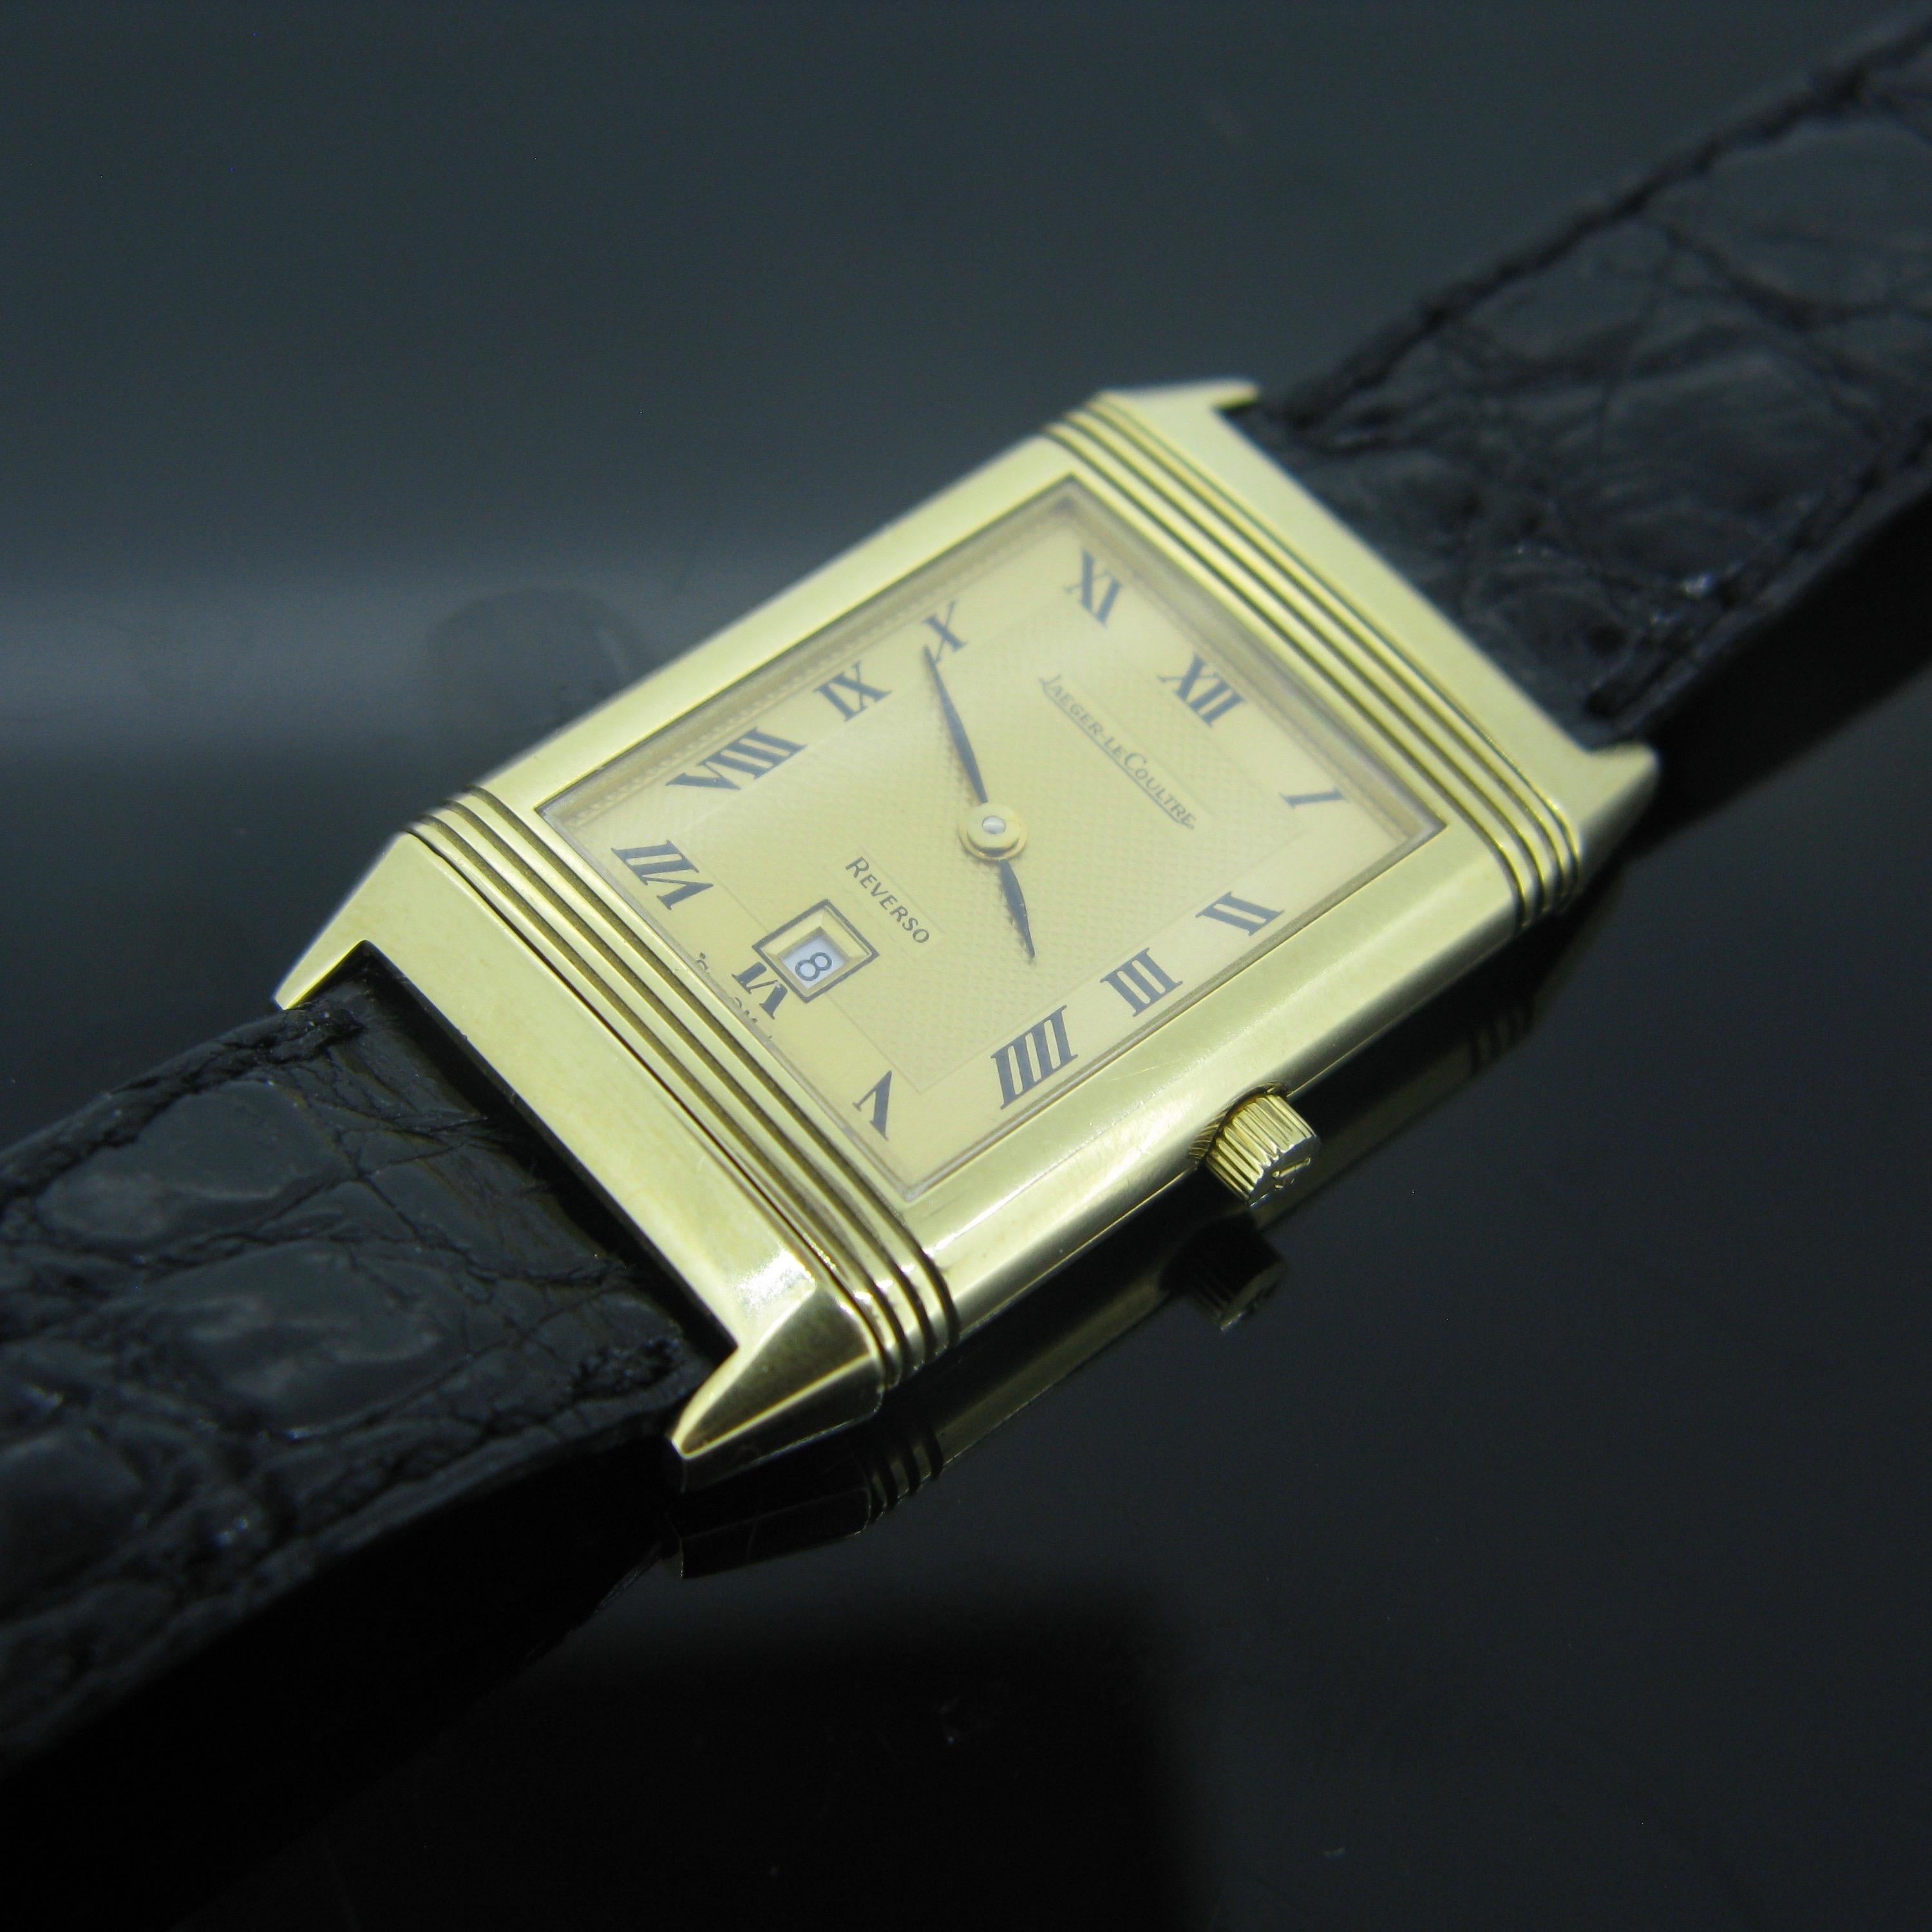 The dial is yellow with black Roman numerals. The square case is made in 18k Yellow Gold. The strap is in black leather and with a gold plated clasp signed JL. It is hallmarked with the Swiss hallmarks for 18kt gold and with the maker’s mark. It is